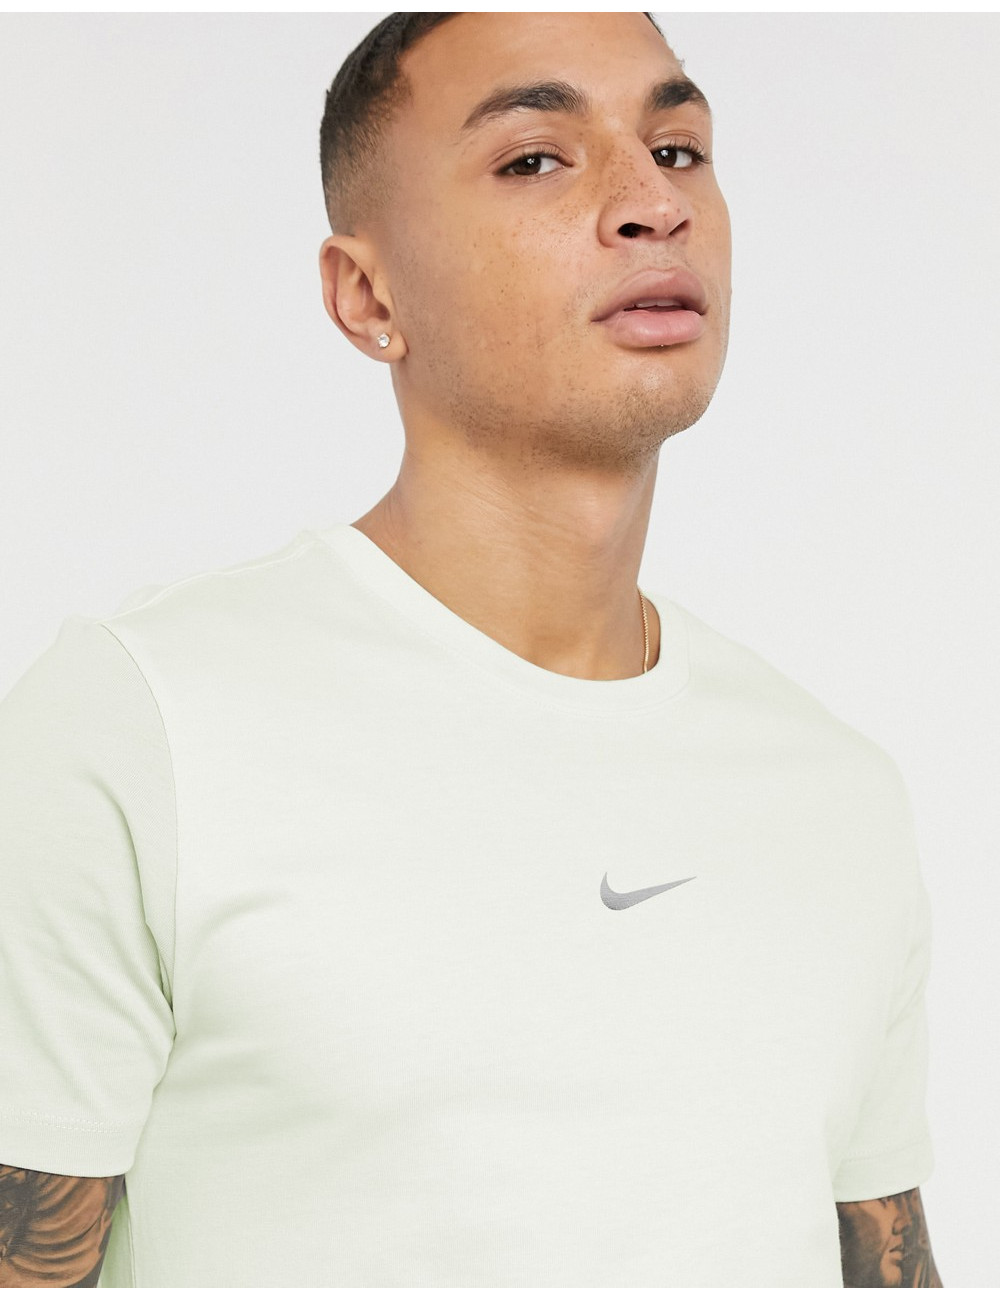 Nike t-shirt in pale...